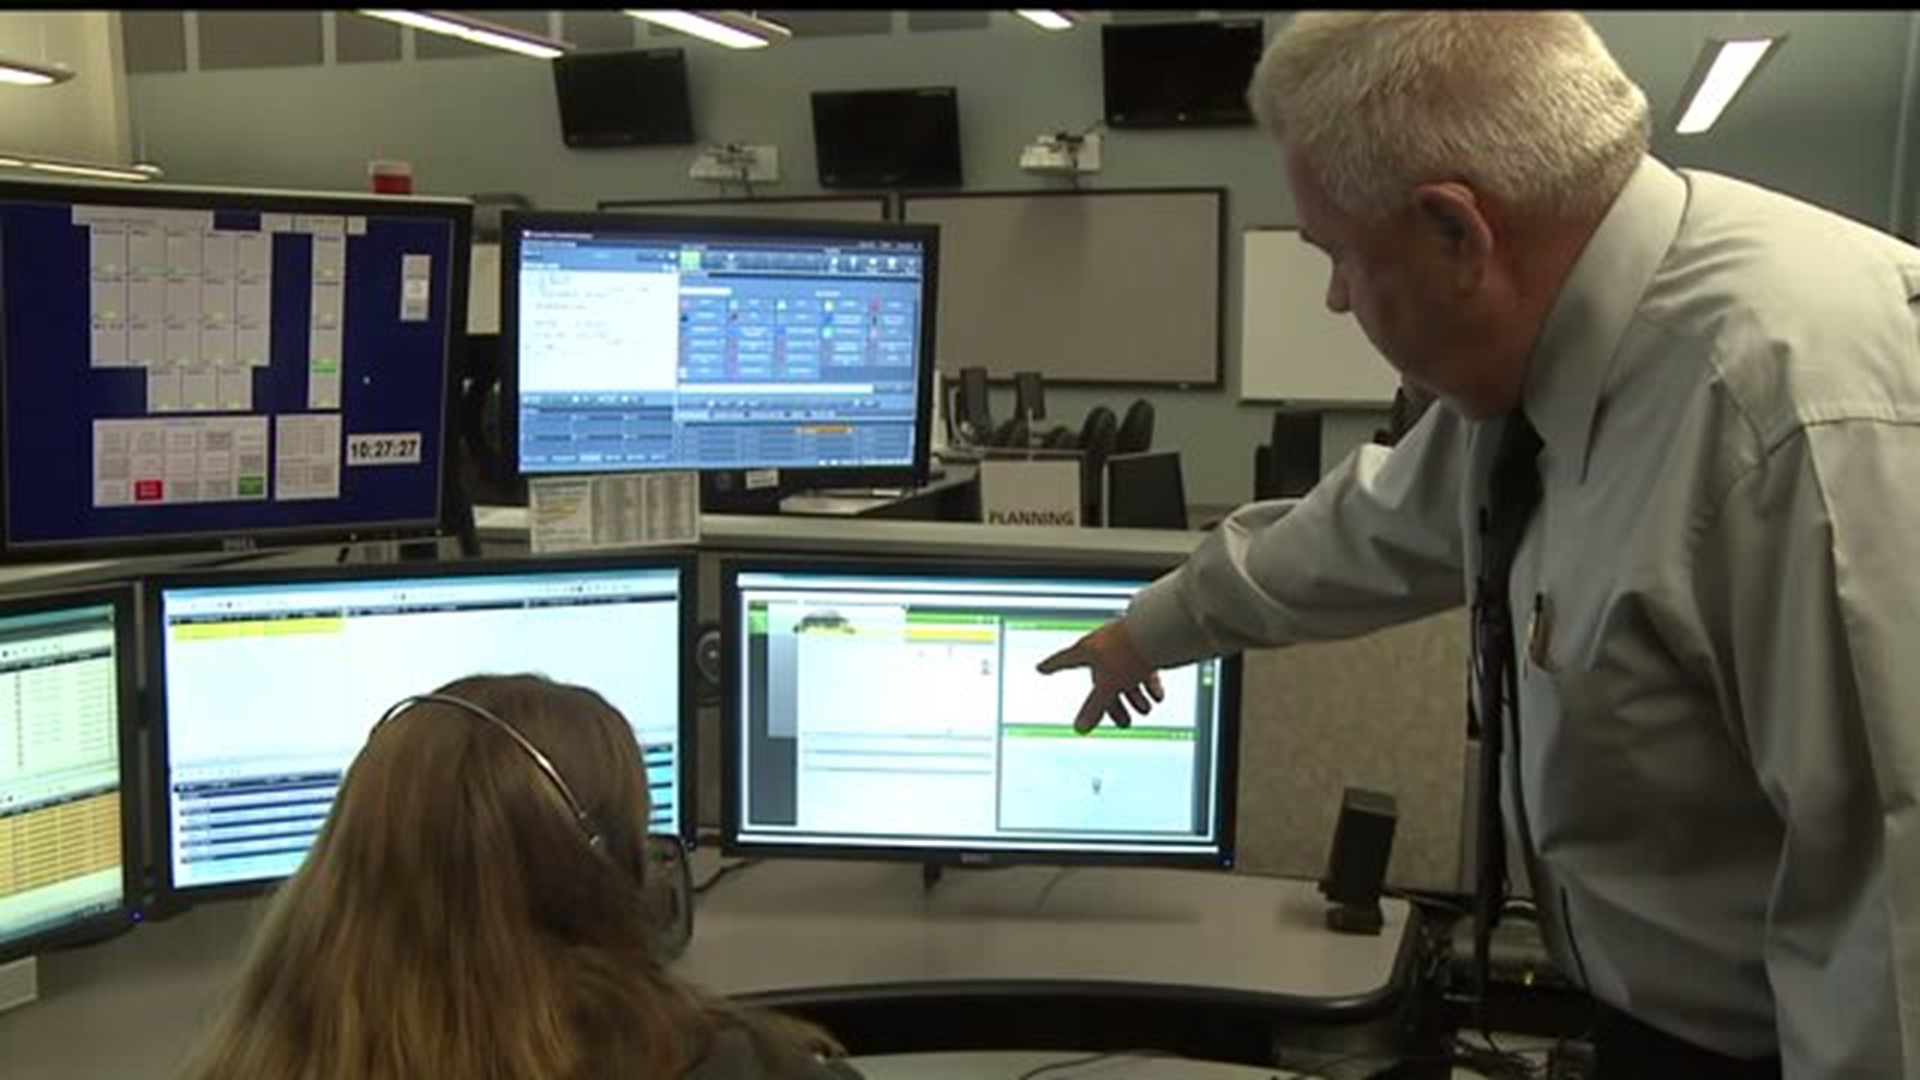 Texting 911 now available in York County